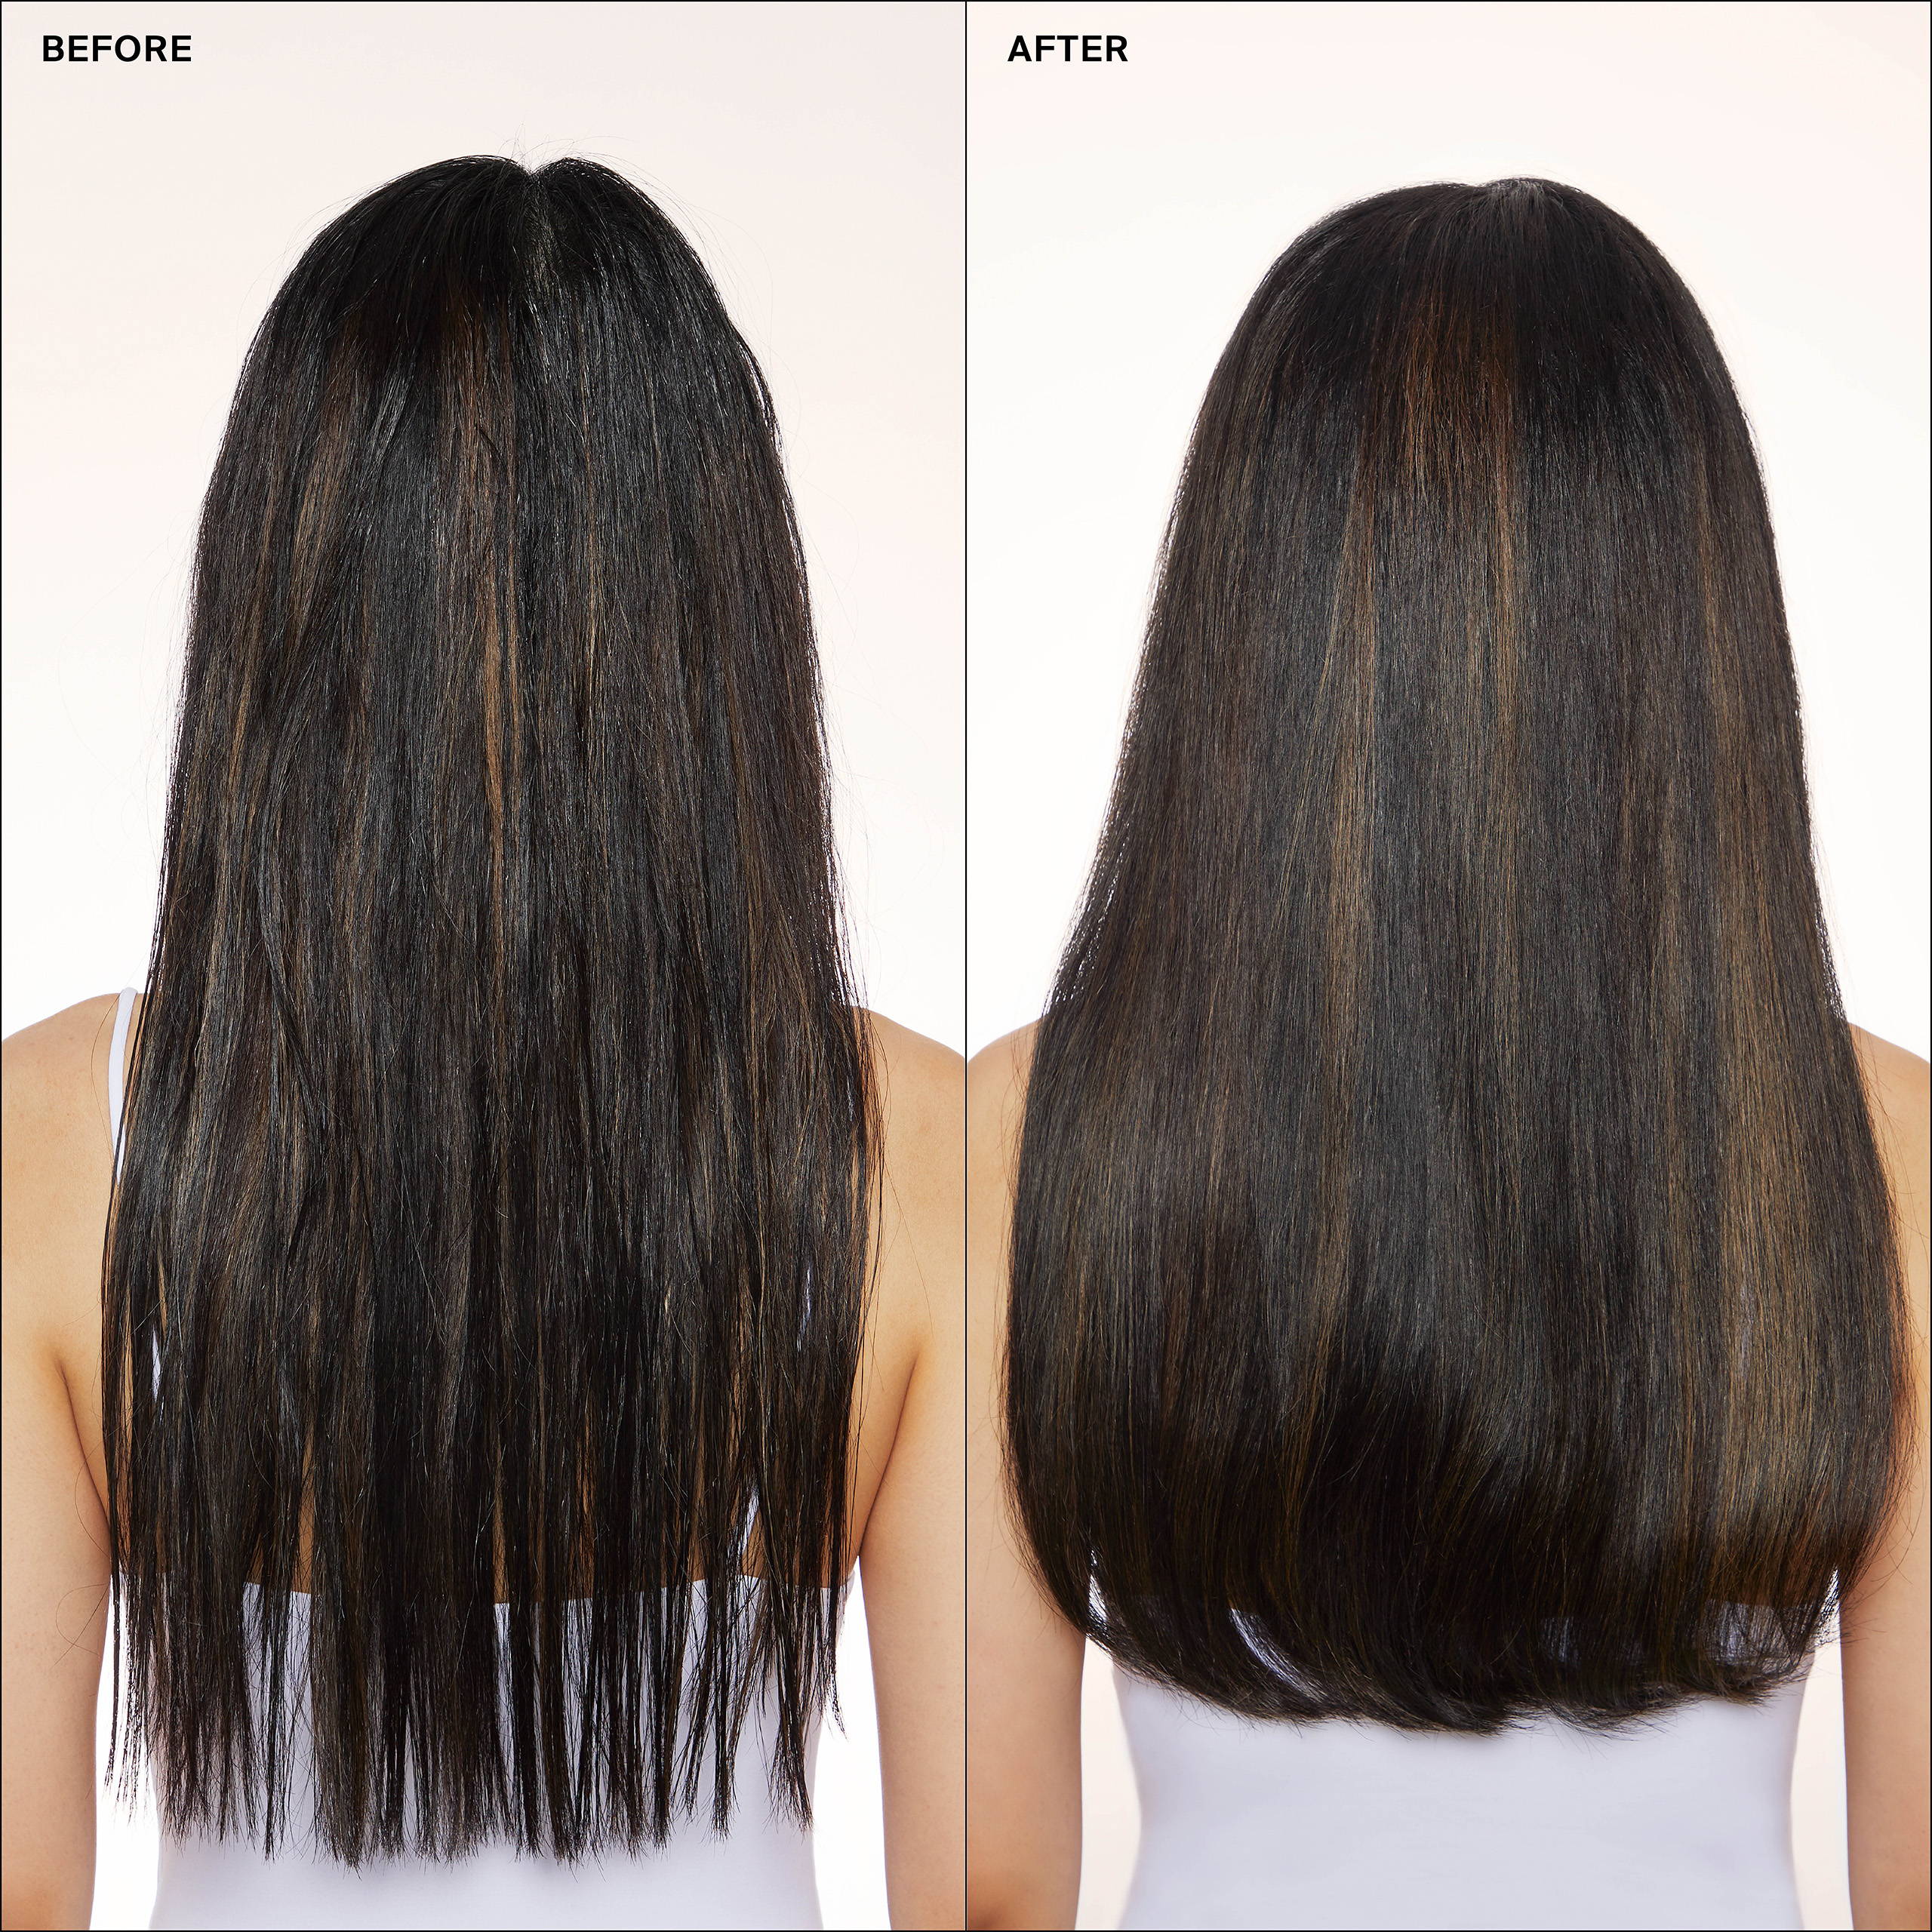 Before and After Image using Eva NYC Freshen Up Invisible Dry Shampoo